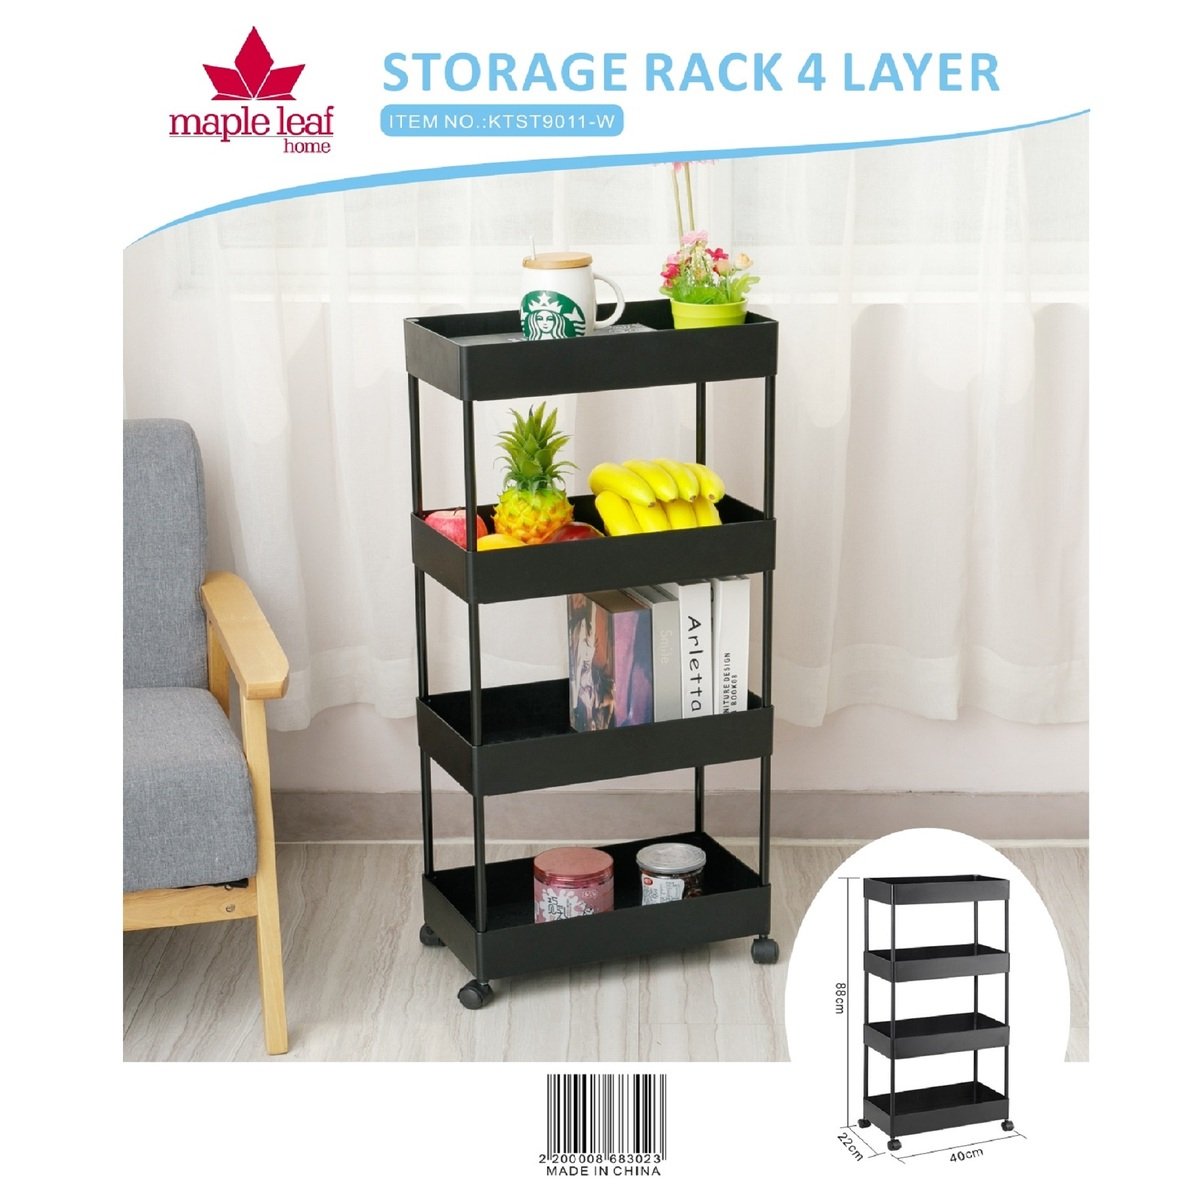 Maple Leaf Home Storage Rack 4 Layer KT9011 Size: W40 x D22 x H88cm Assorted Colors